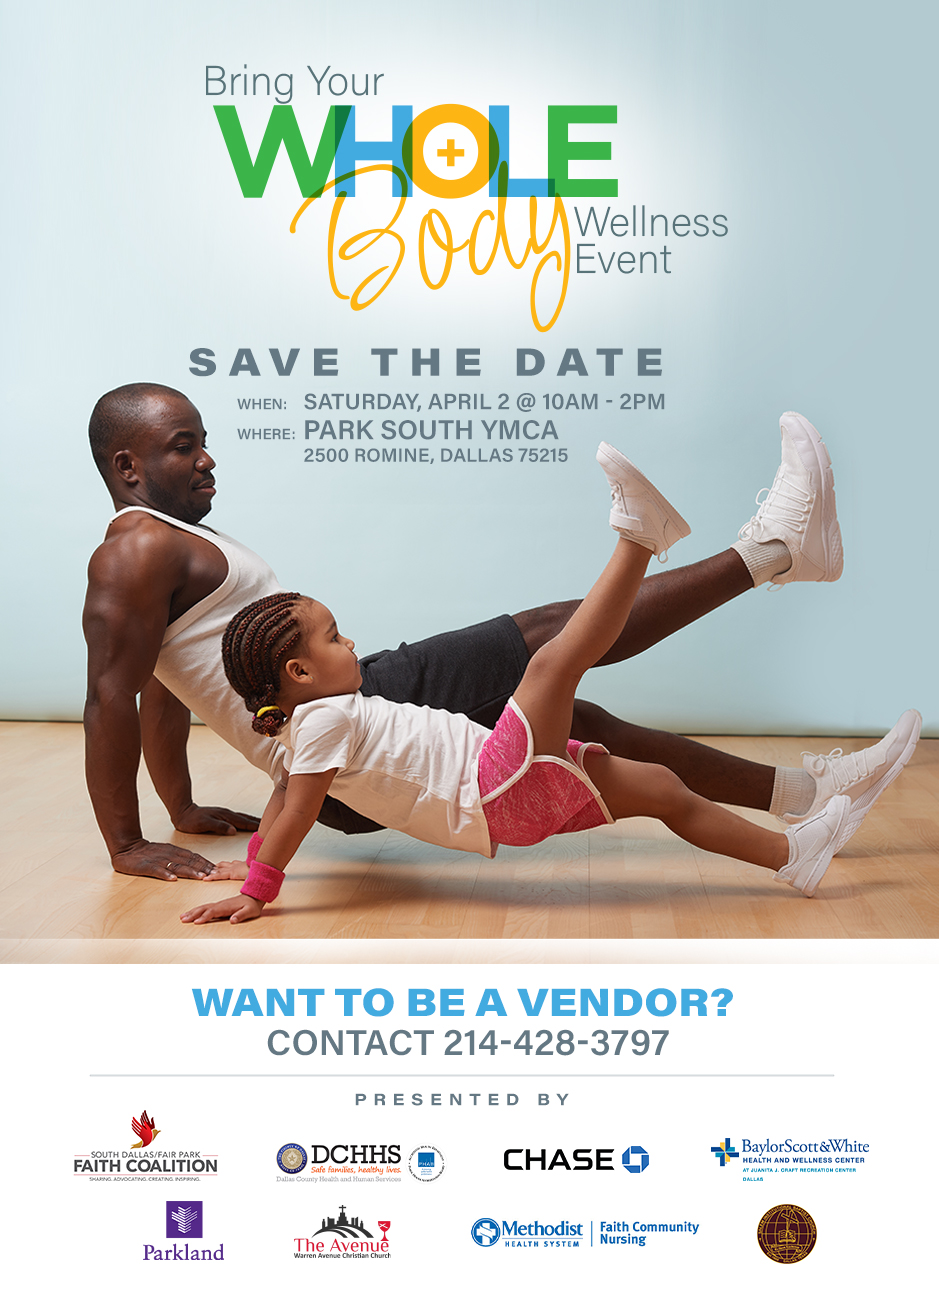 Bring Your WHOLE Body Wellness Event